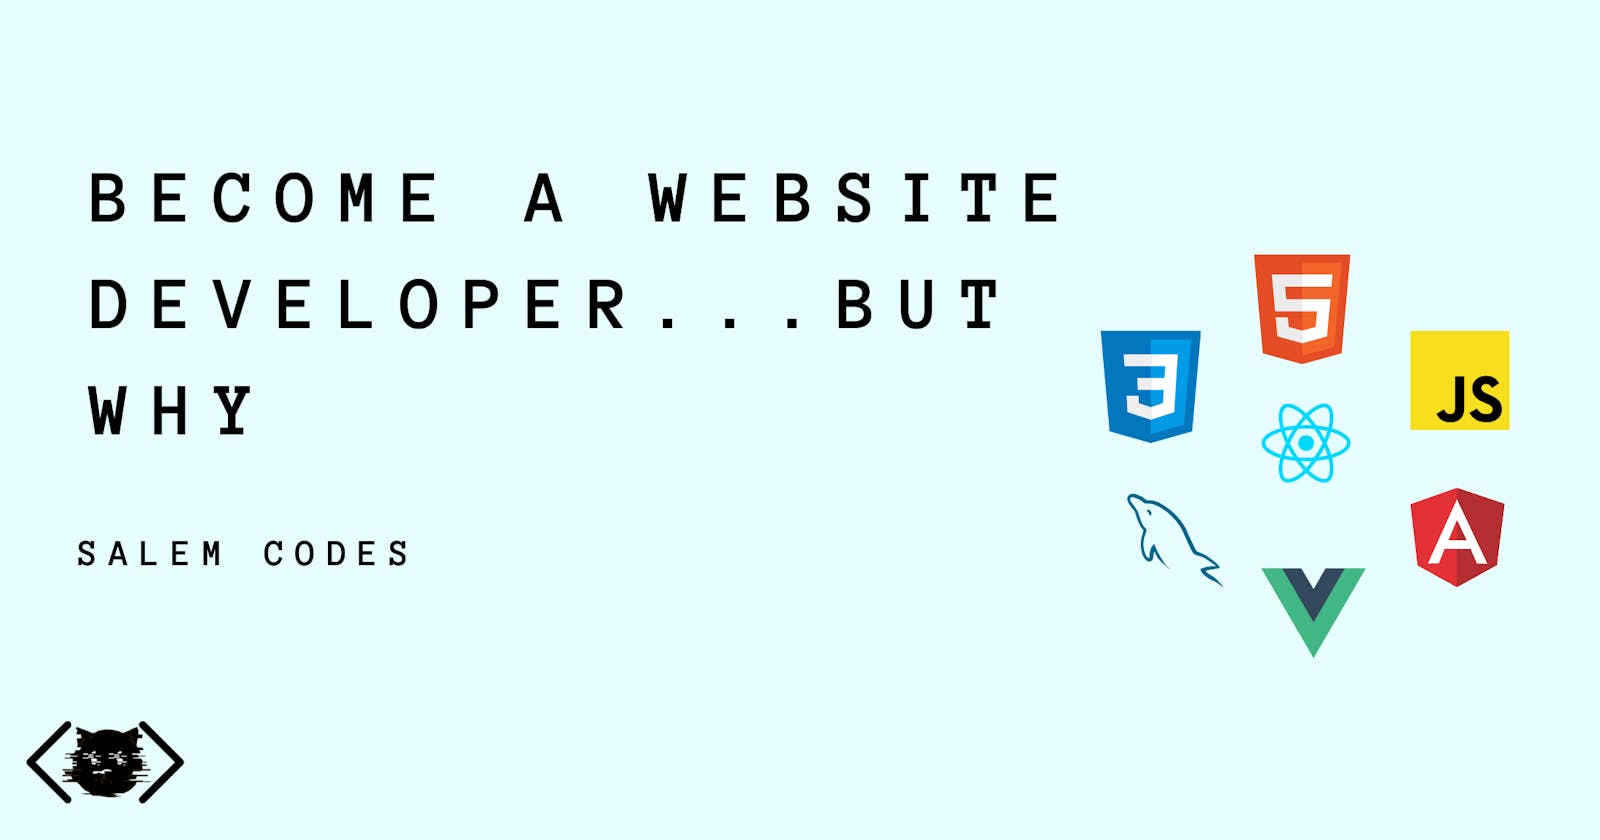 Become a Website Developer...but why?